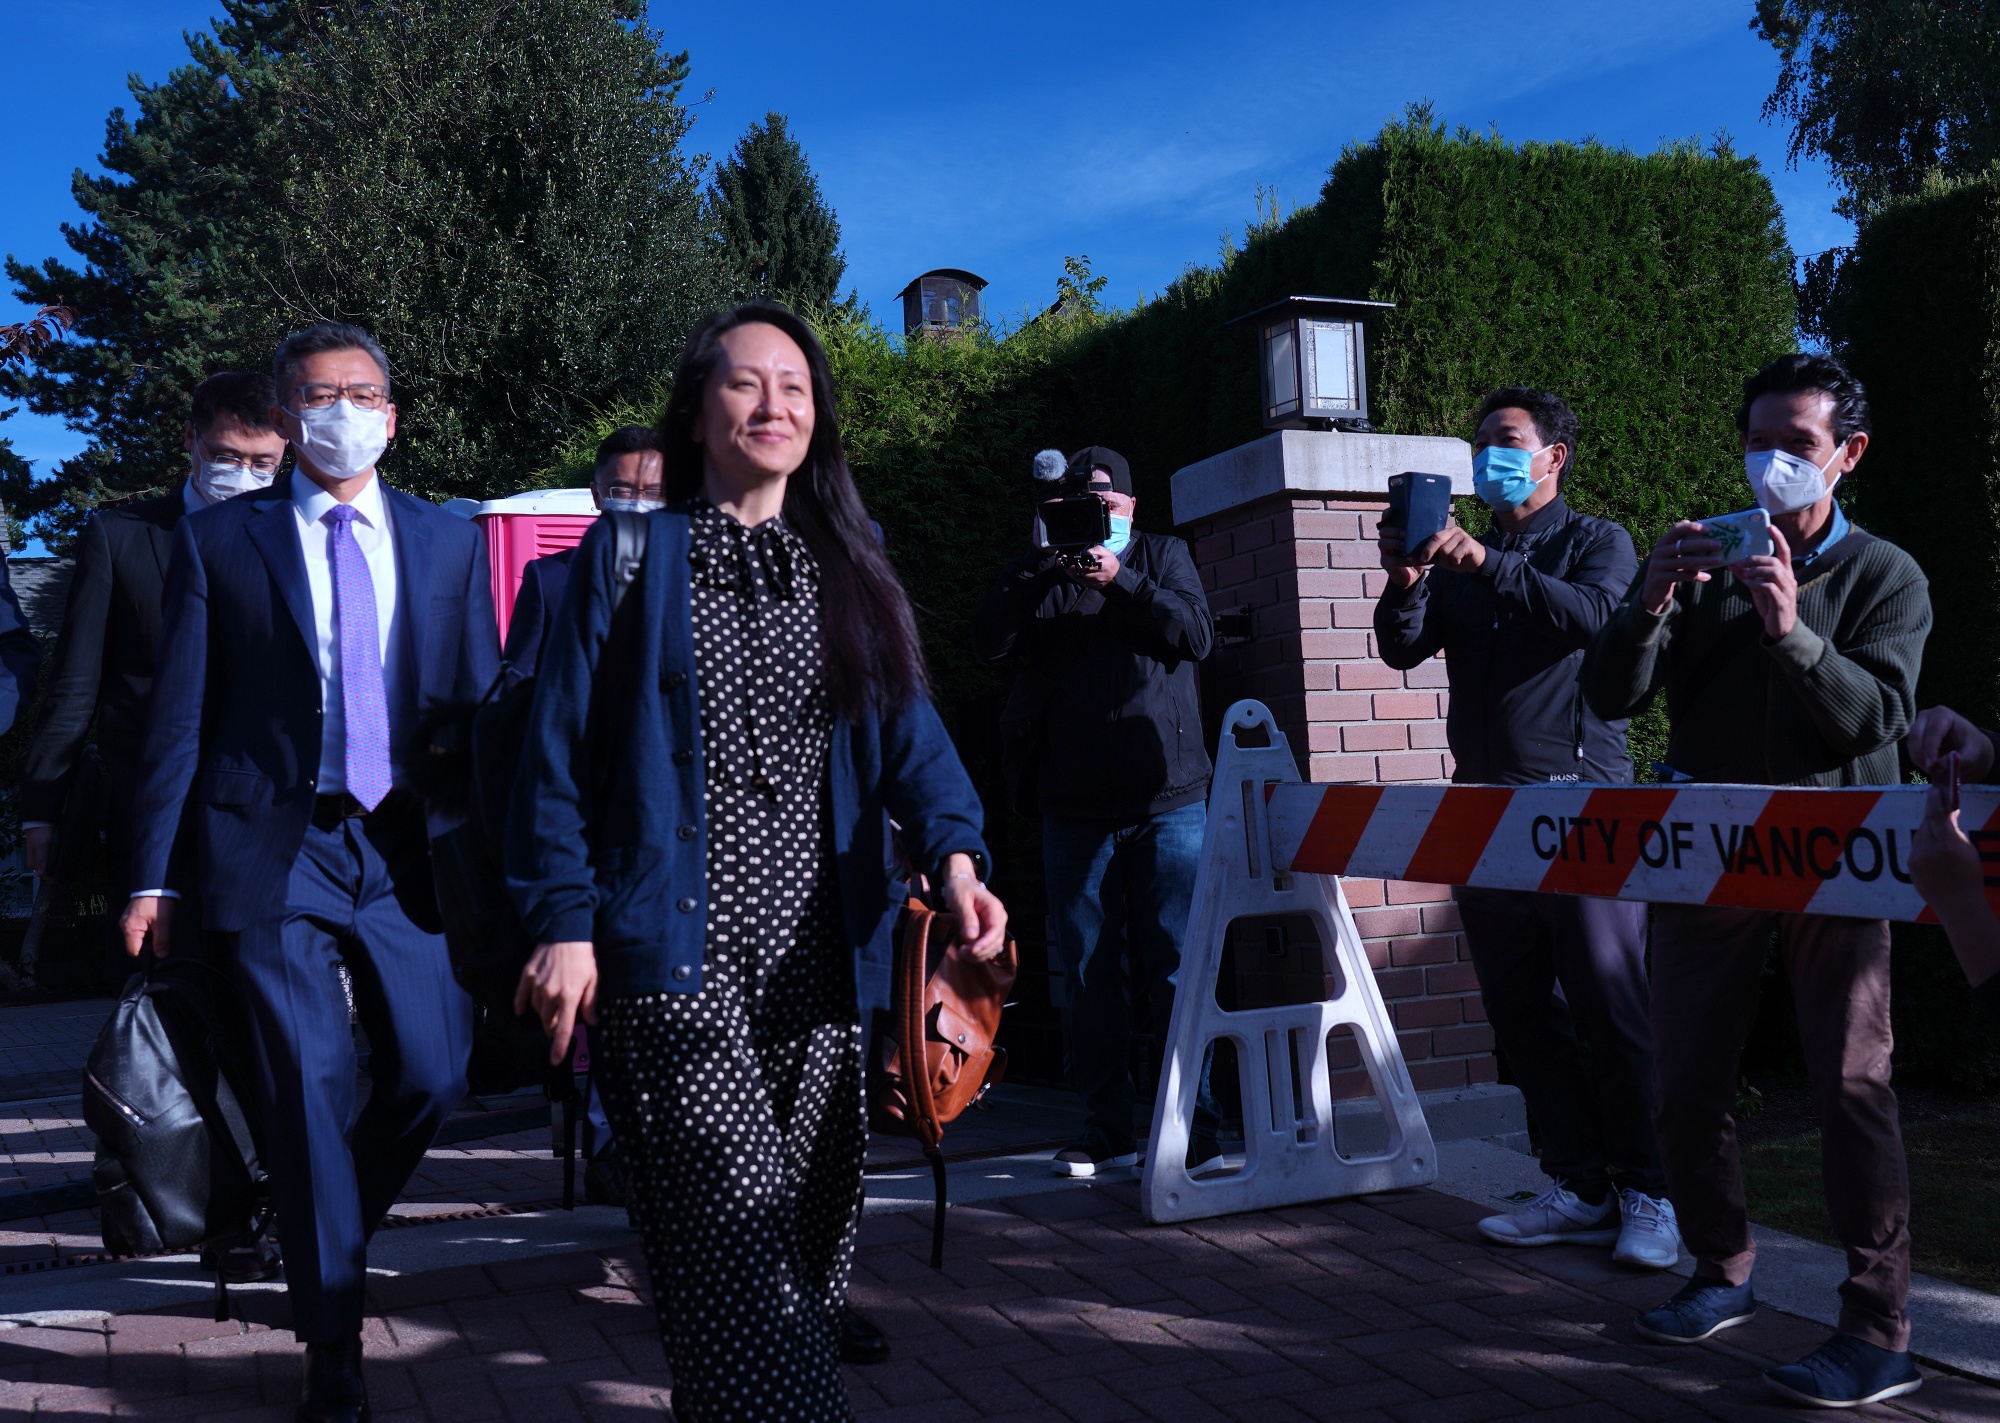 Meng Wanzhou, center, exits her home in Vancouver, on Sept. 24.